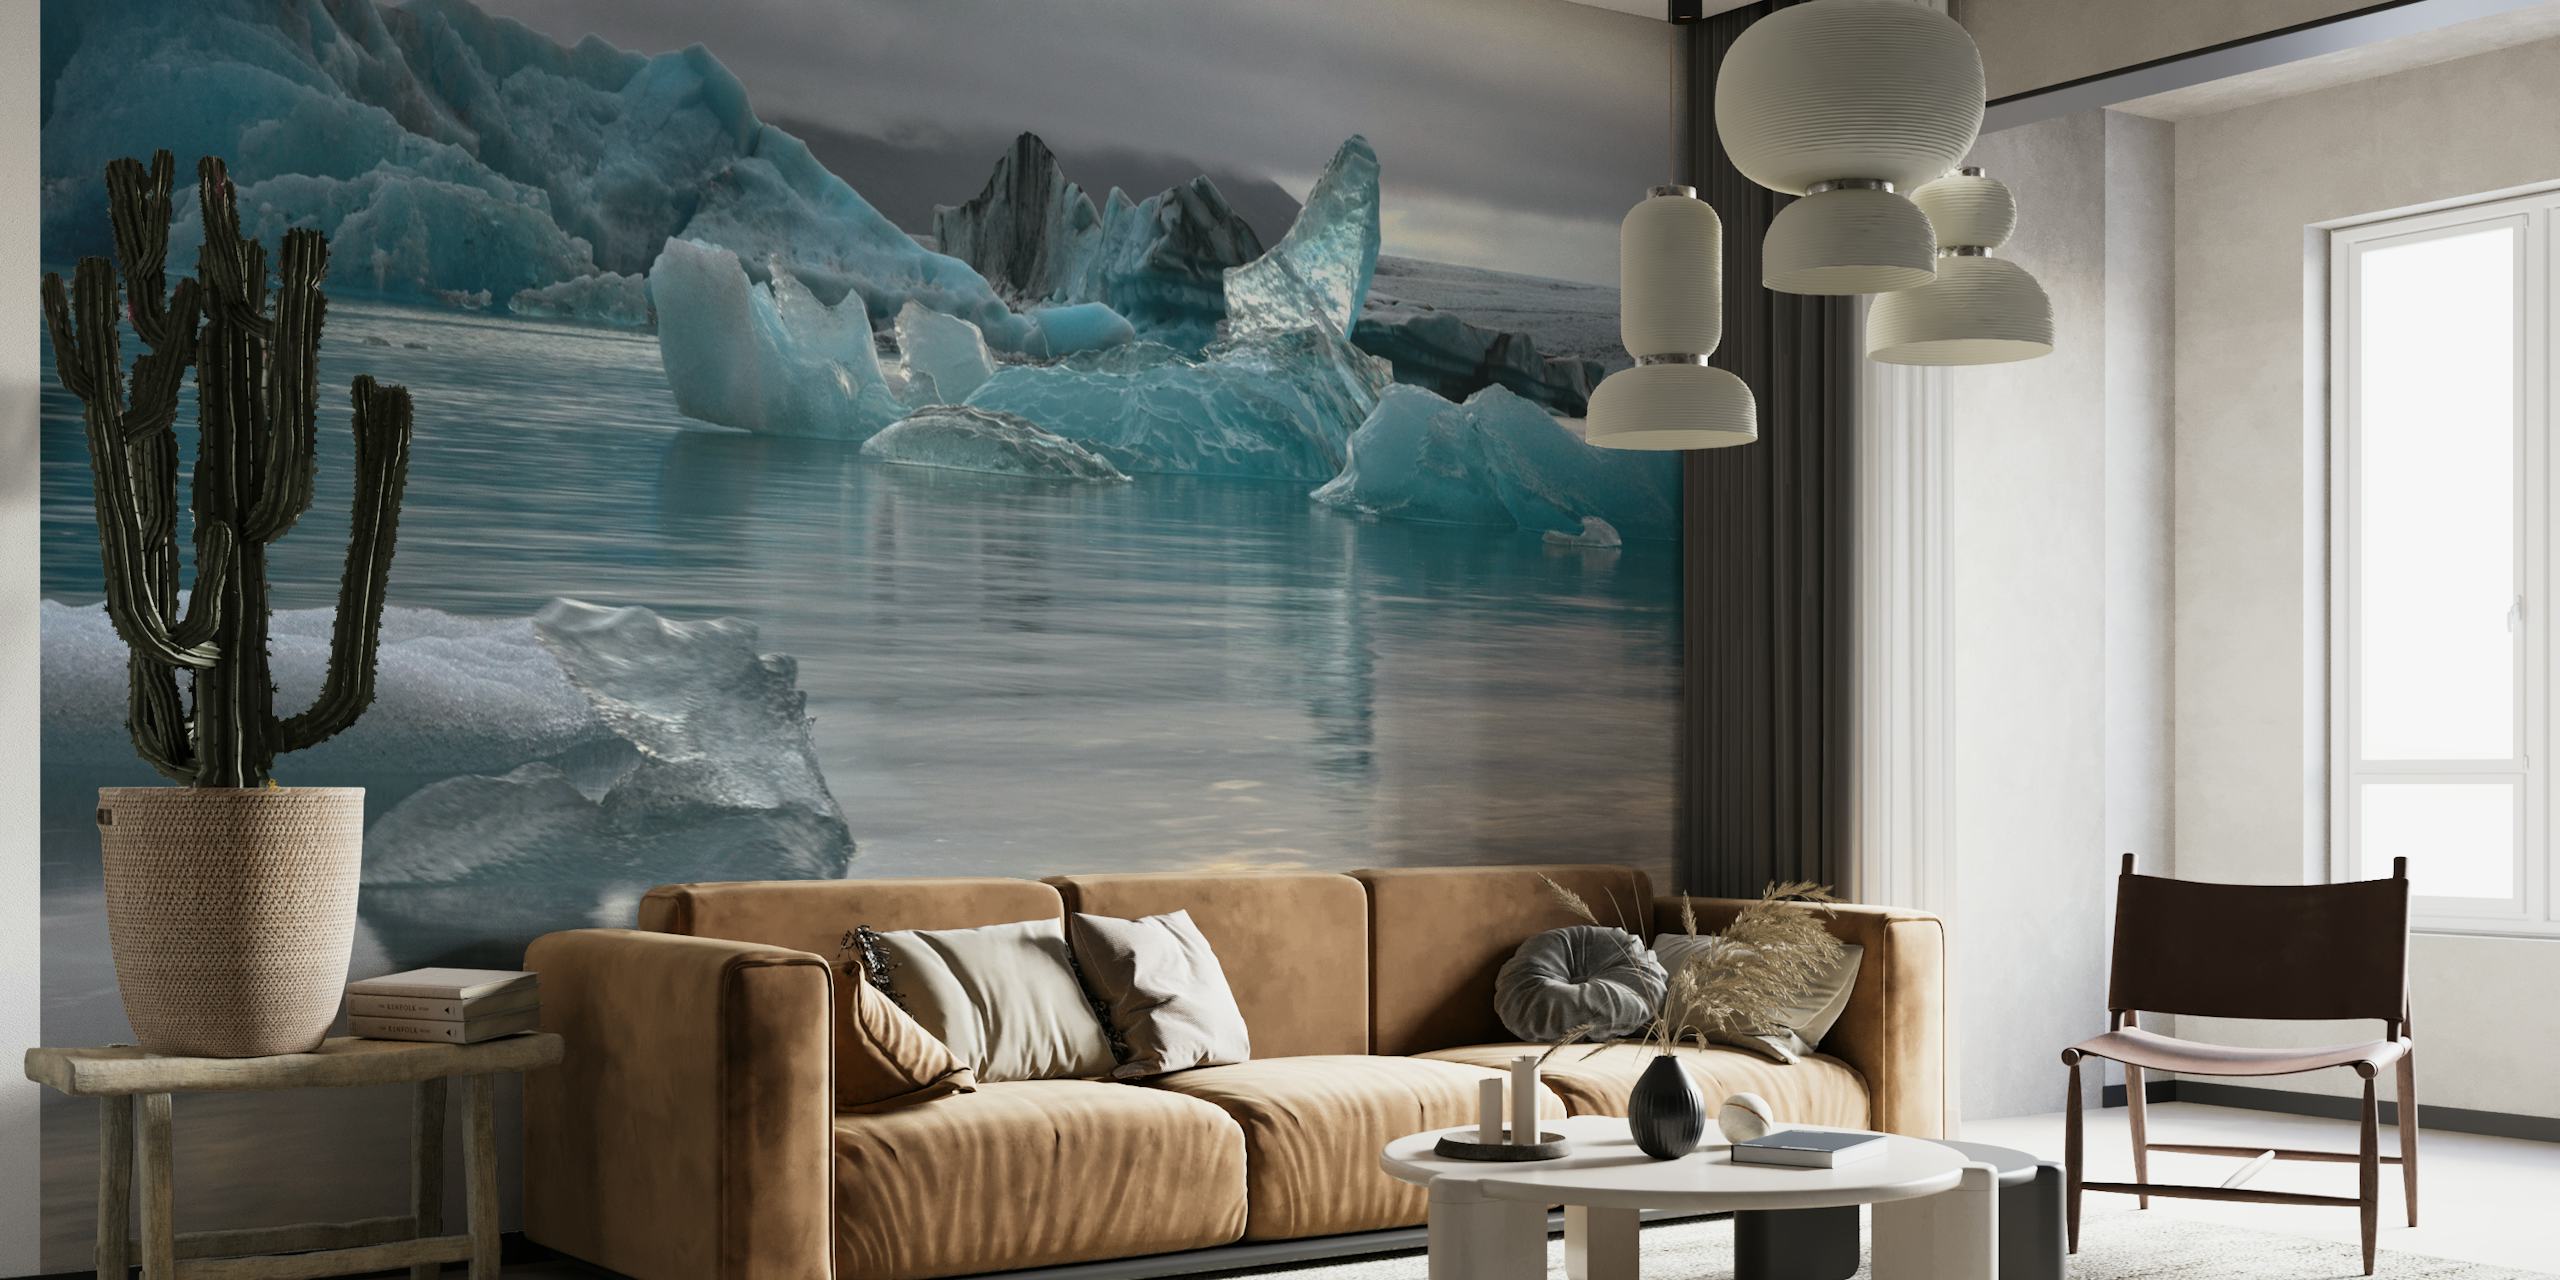 Iceberg wall mural with calm water reflecting a soft sky